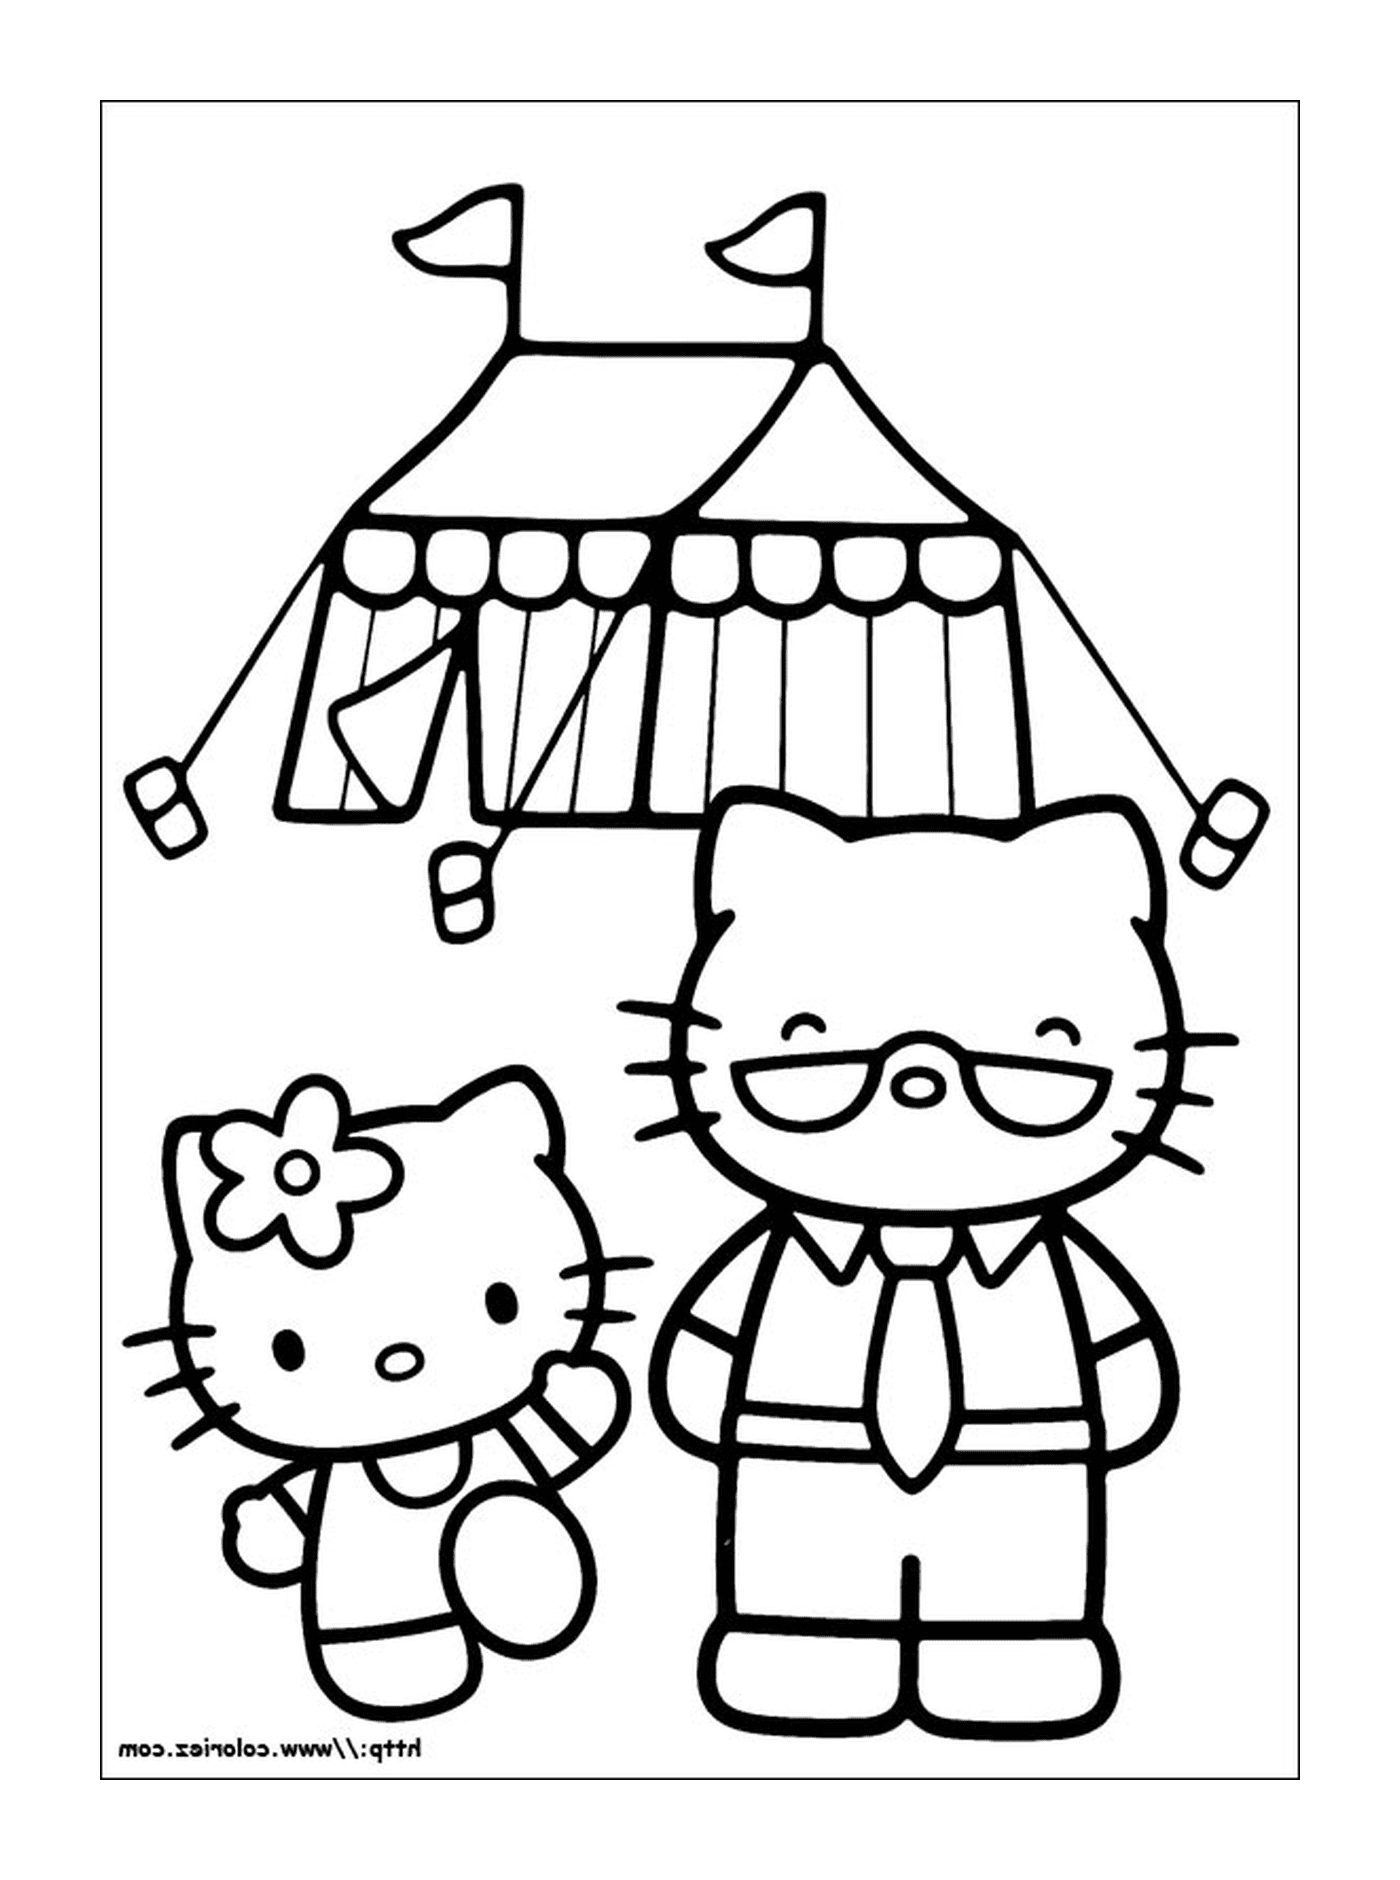  Hello Kitty and a cat 